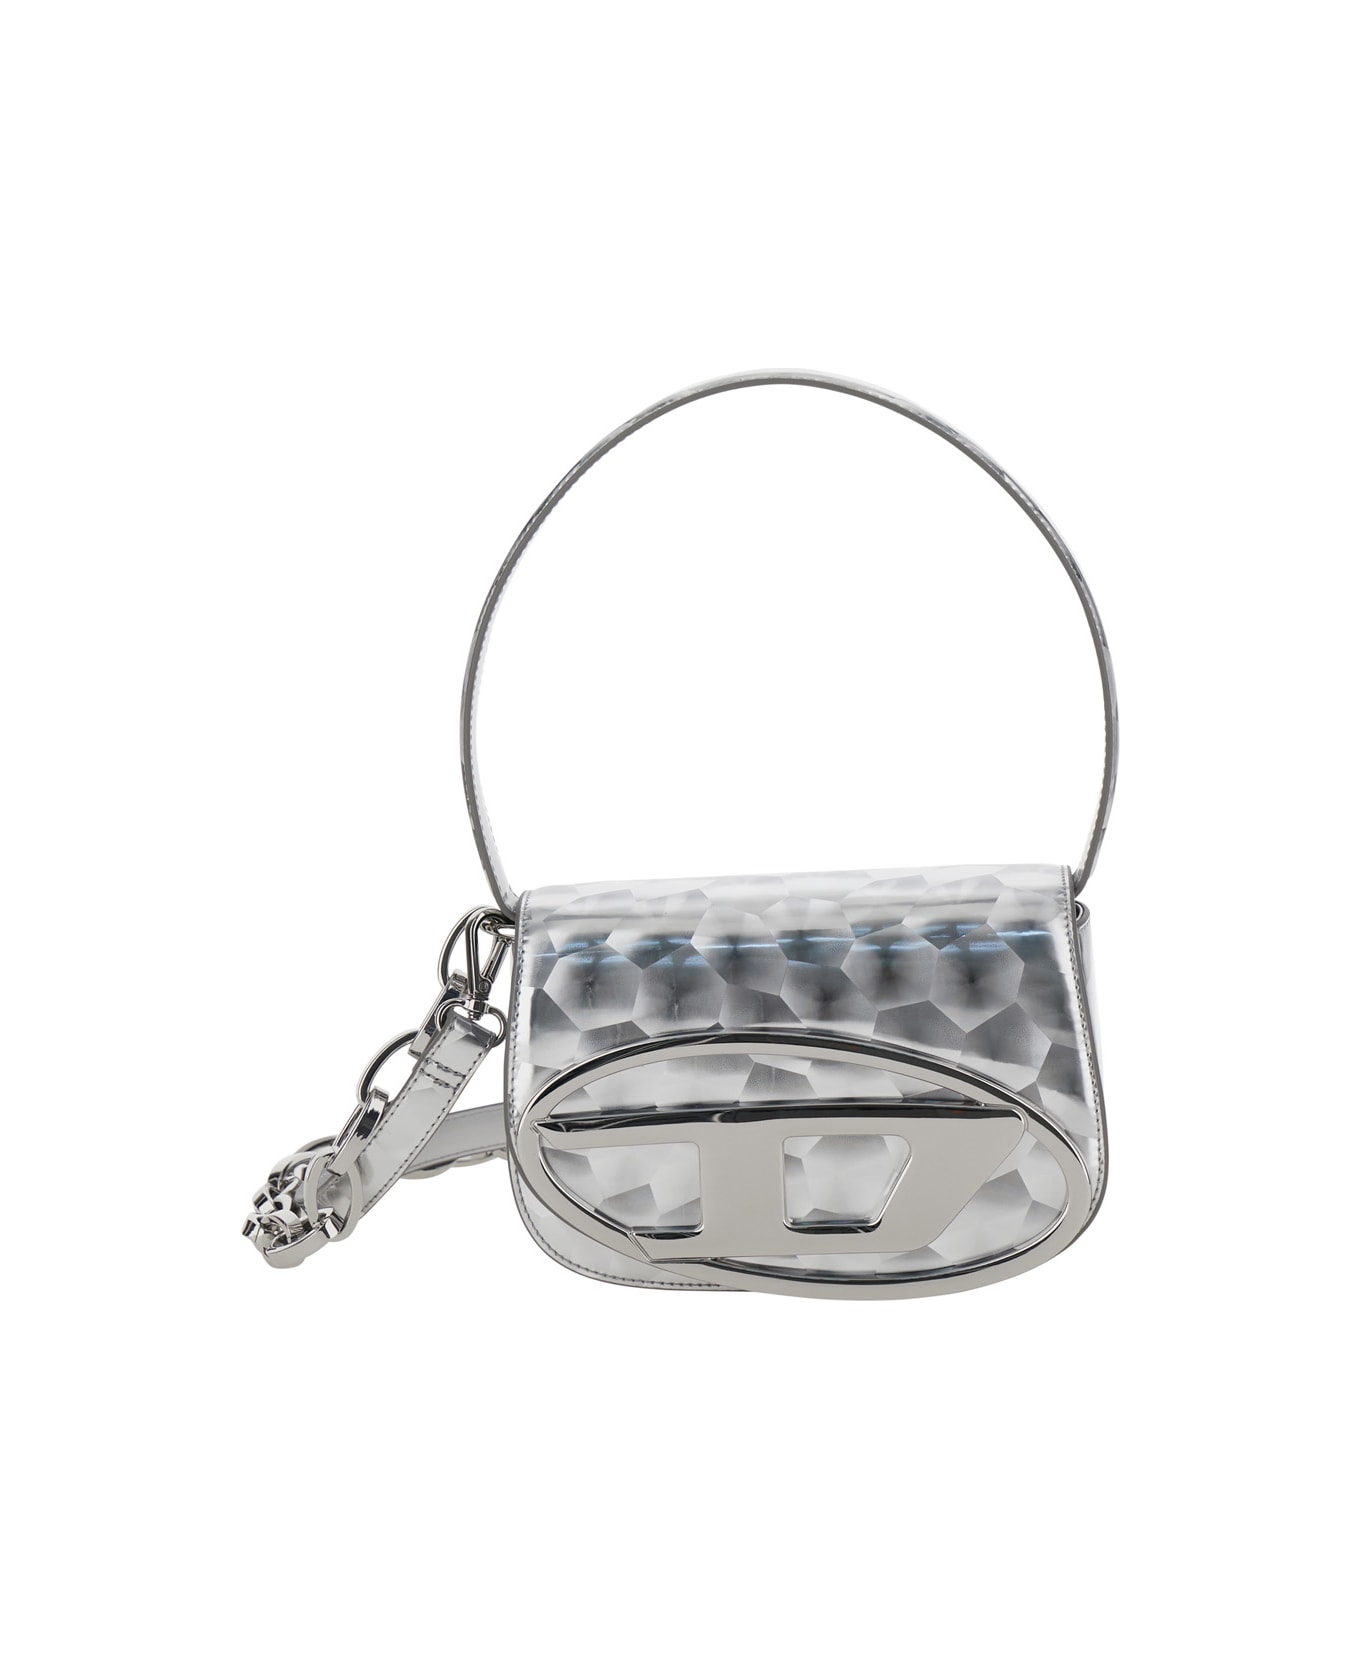 Diesel '1dr' Silver Shoulder Bag With Front Metallic Oval D Logo In Techno Fabric Woman - Metallic